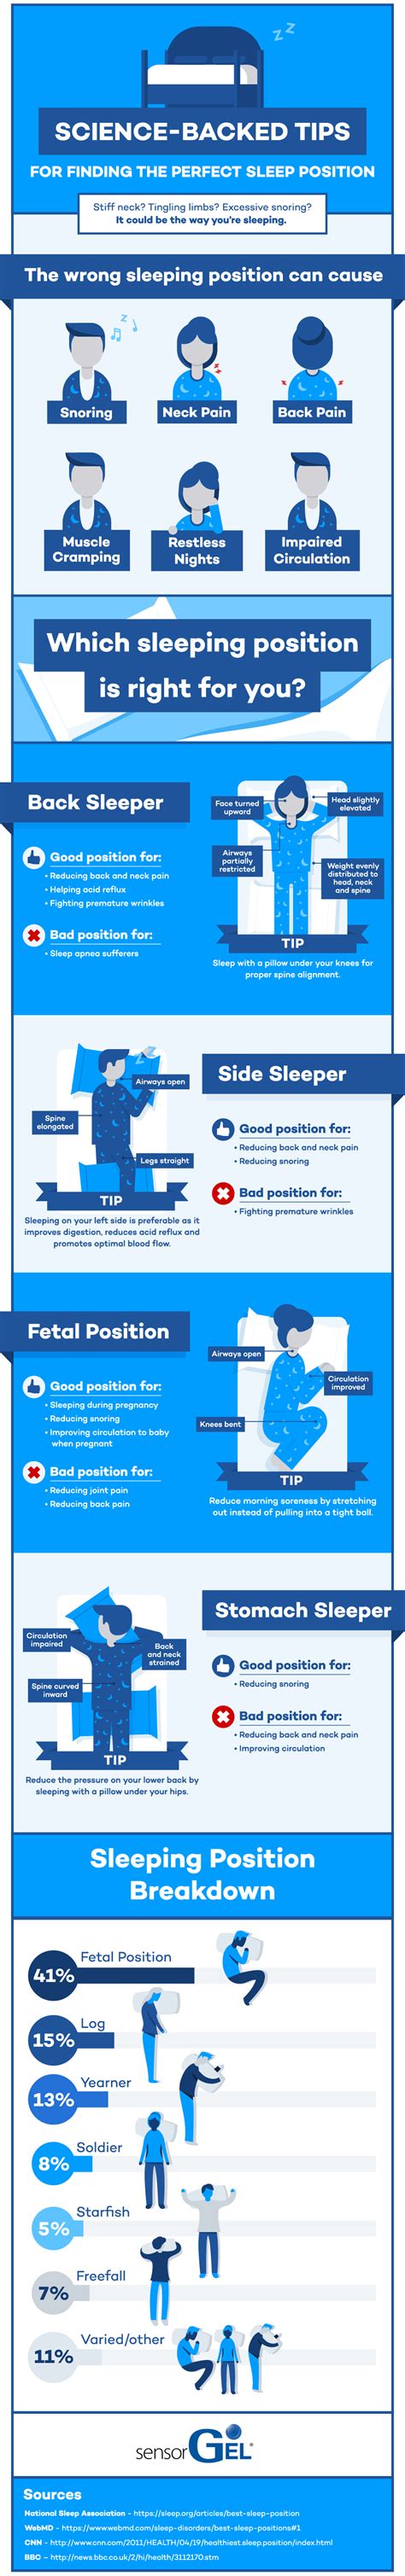 How To Find The Perfect Sleep Position Infographic